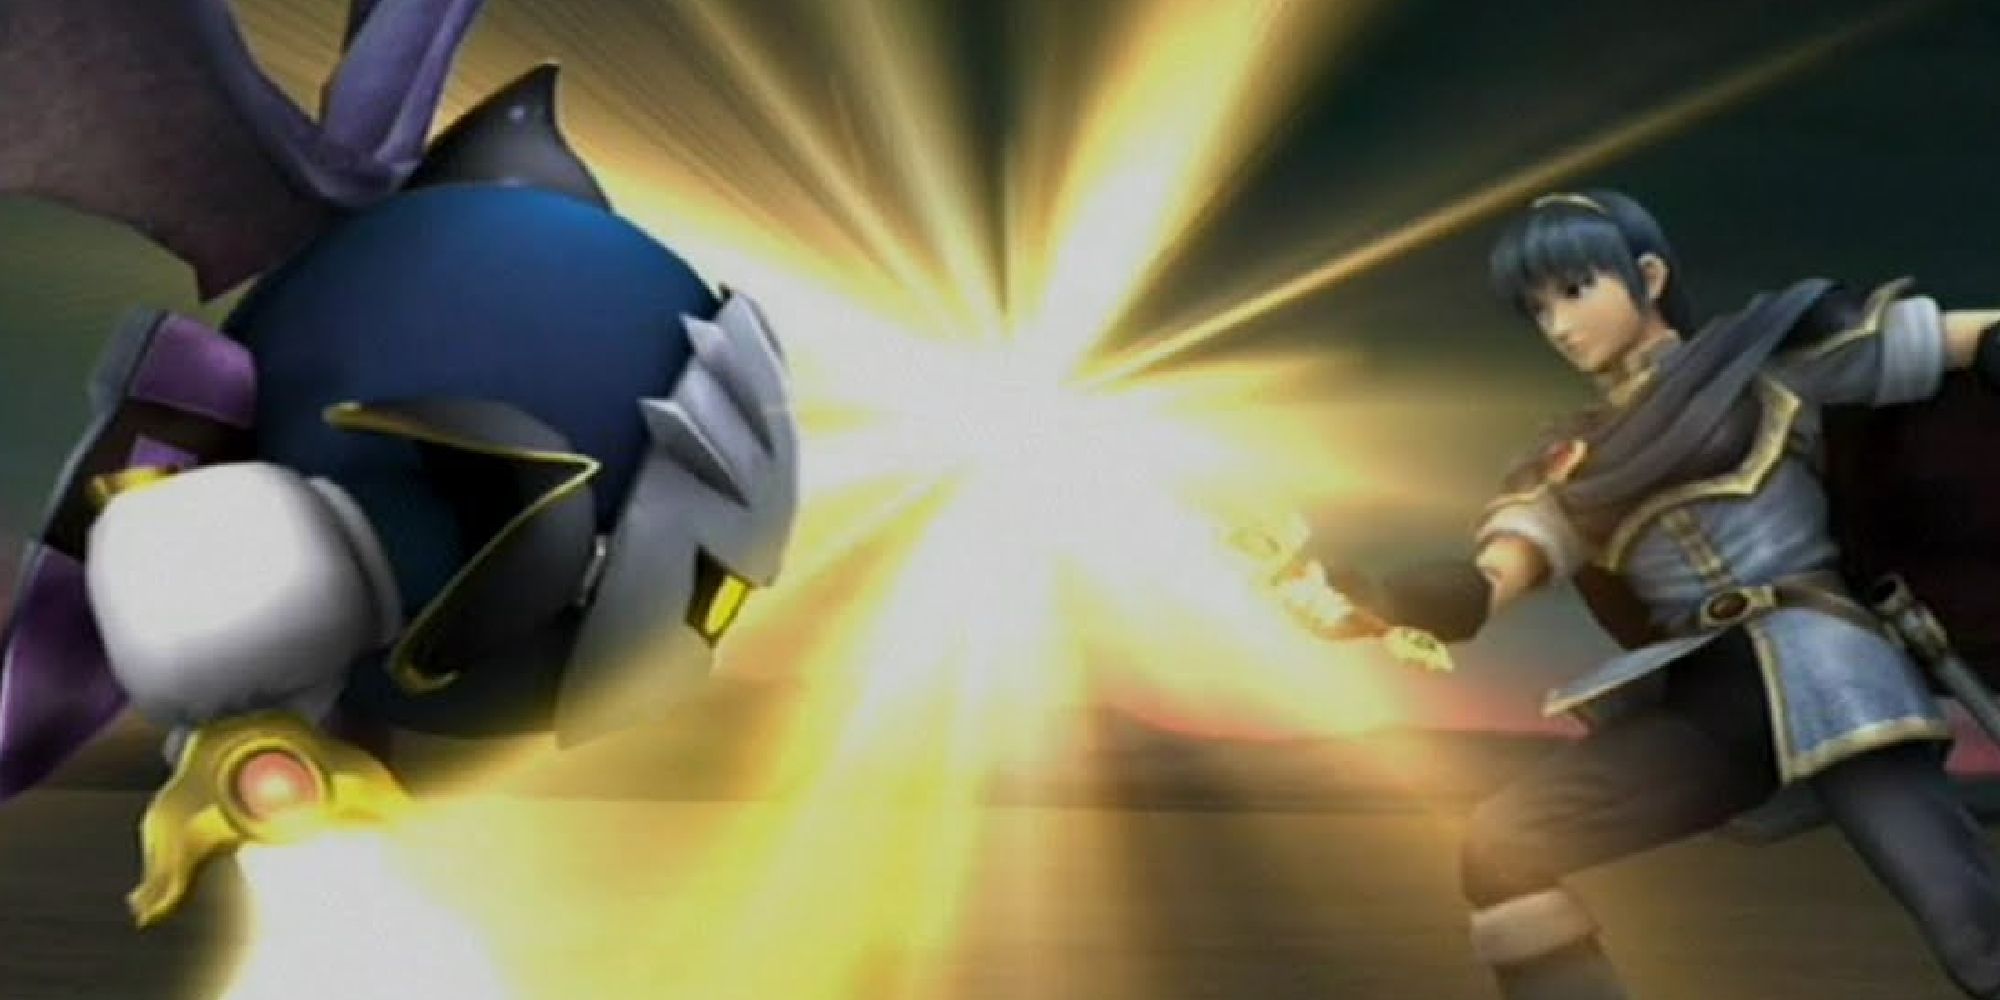 Meta Knight dueling with Marth in The Subspace Emissary